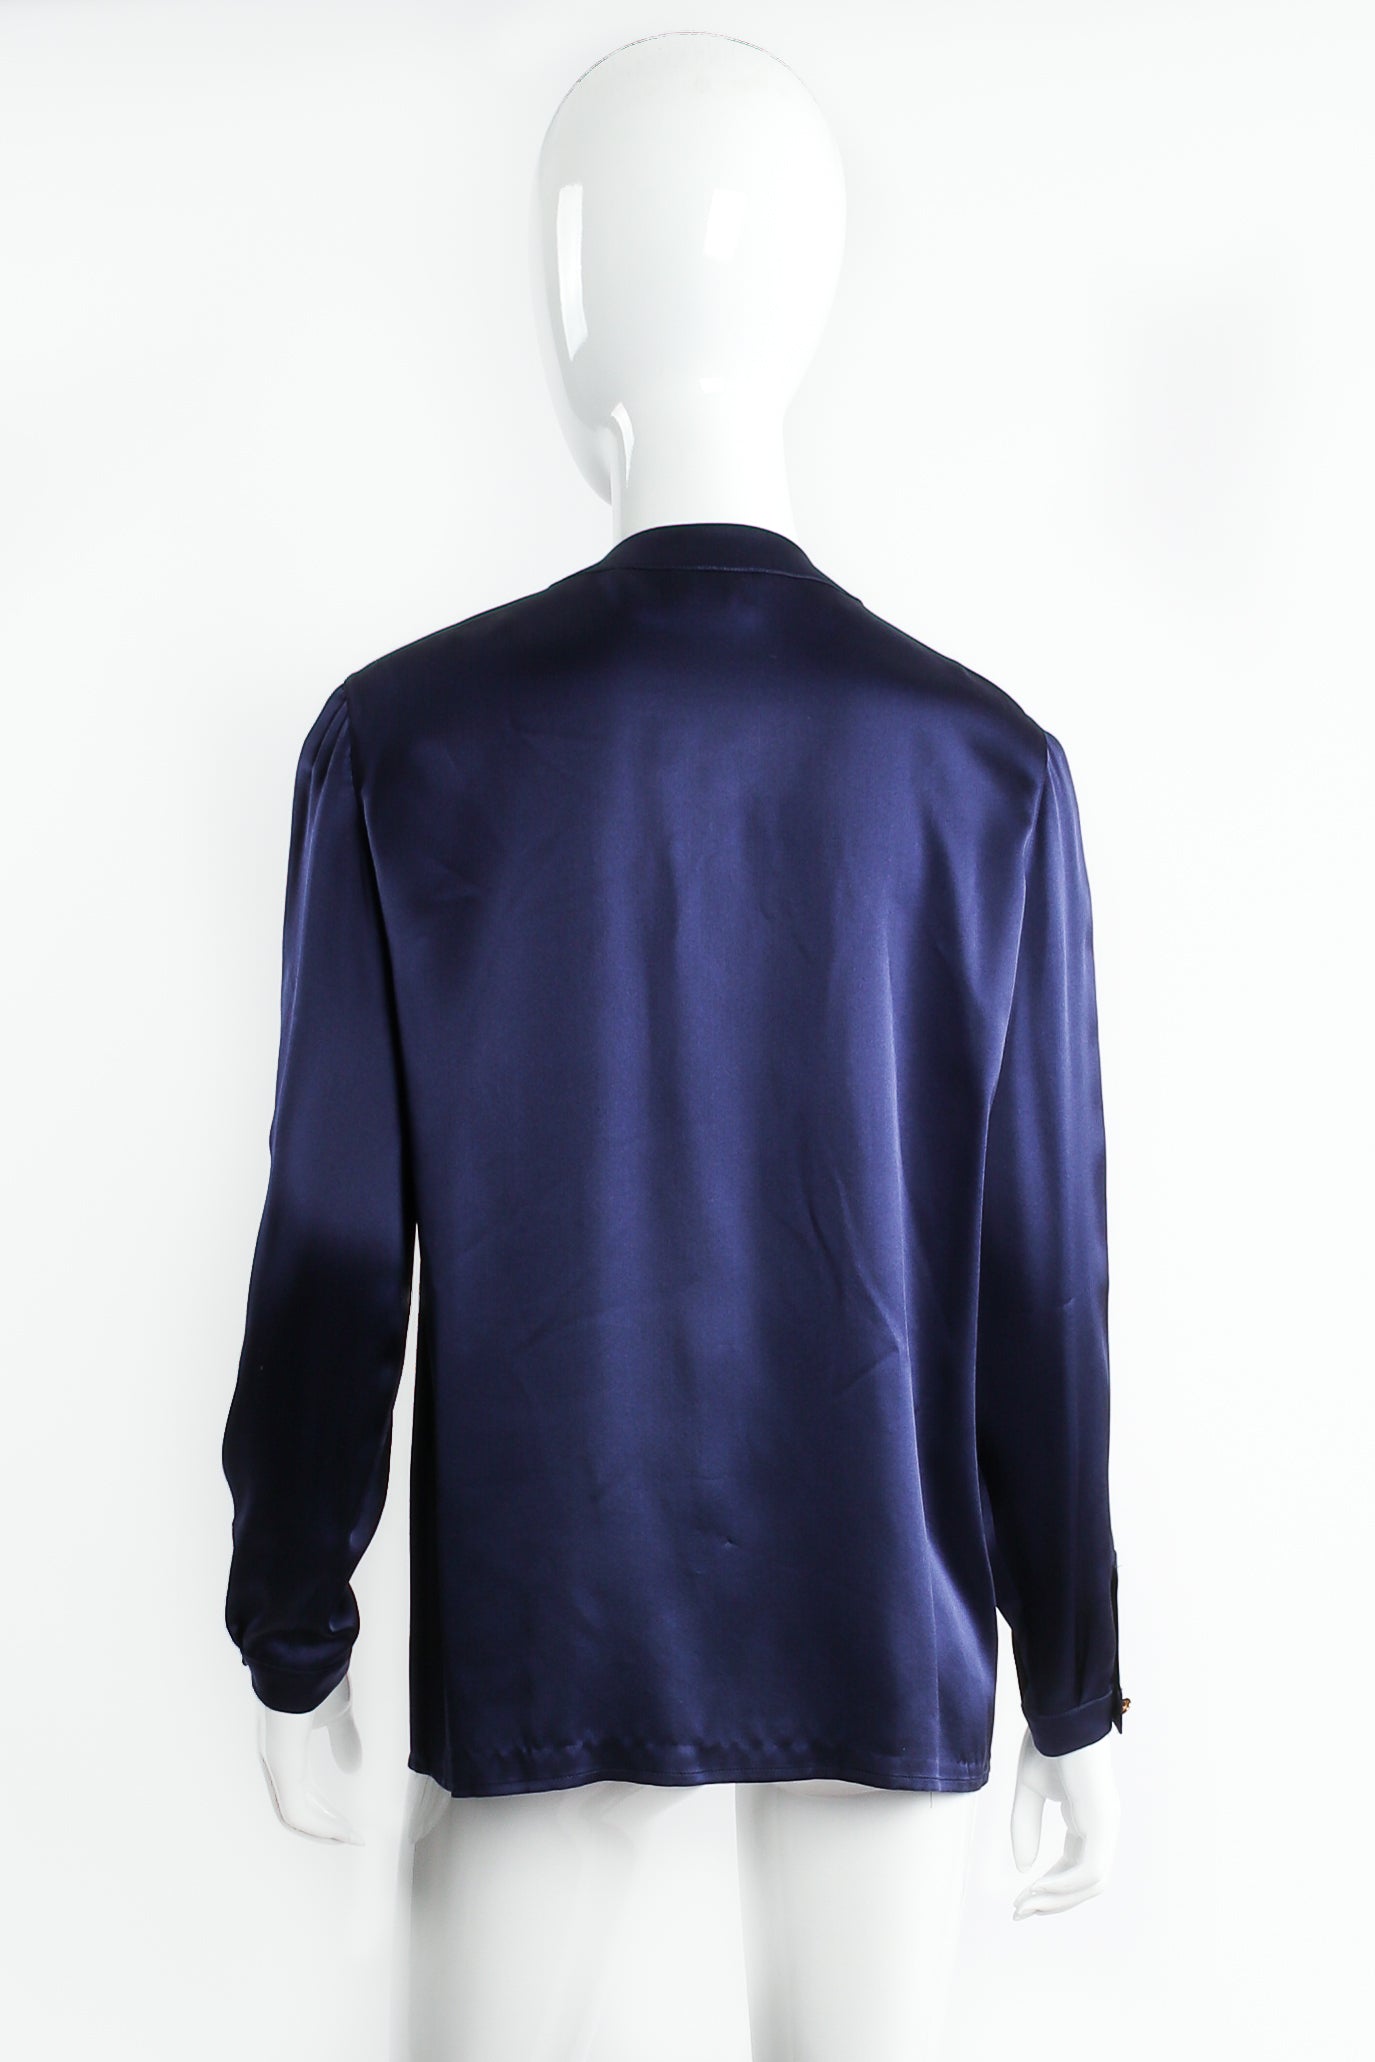 Vintage Chanel Navy Satin Button Pocket Blouse on mannequin back at Recess Los Angeles